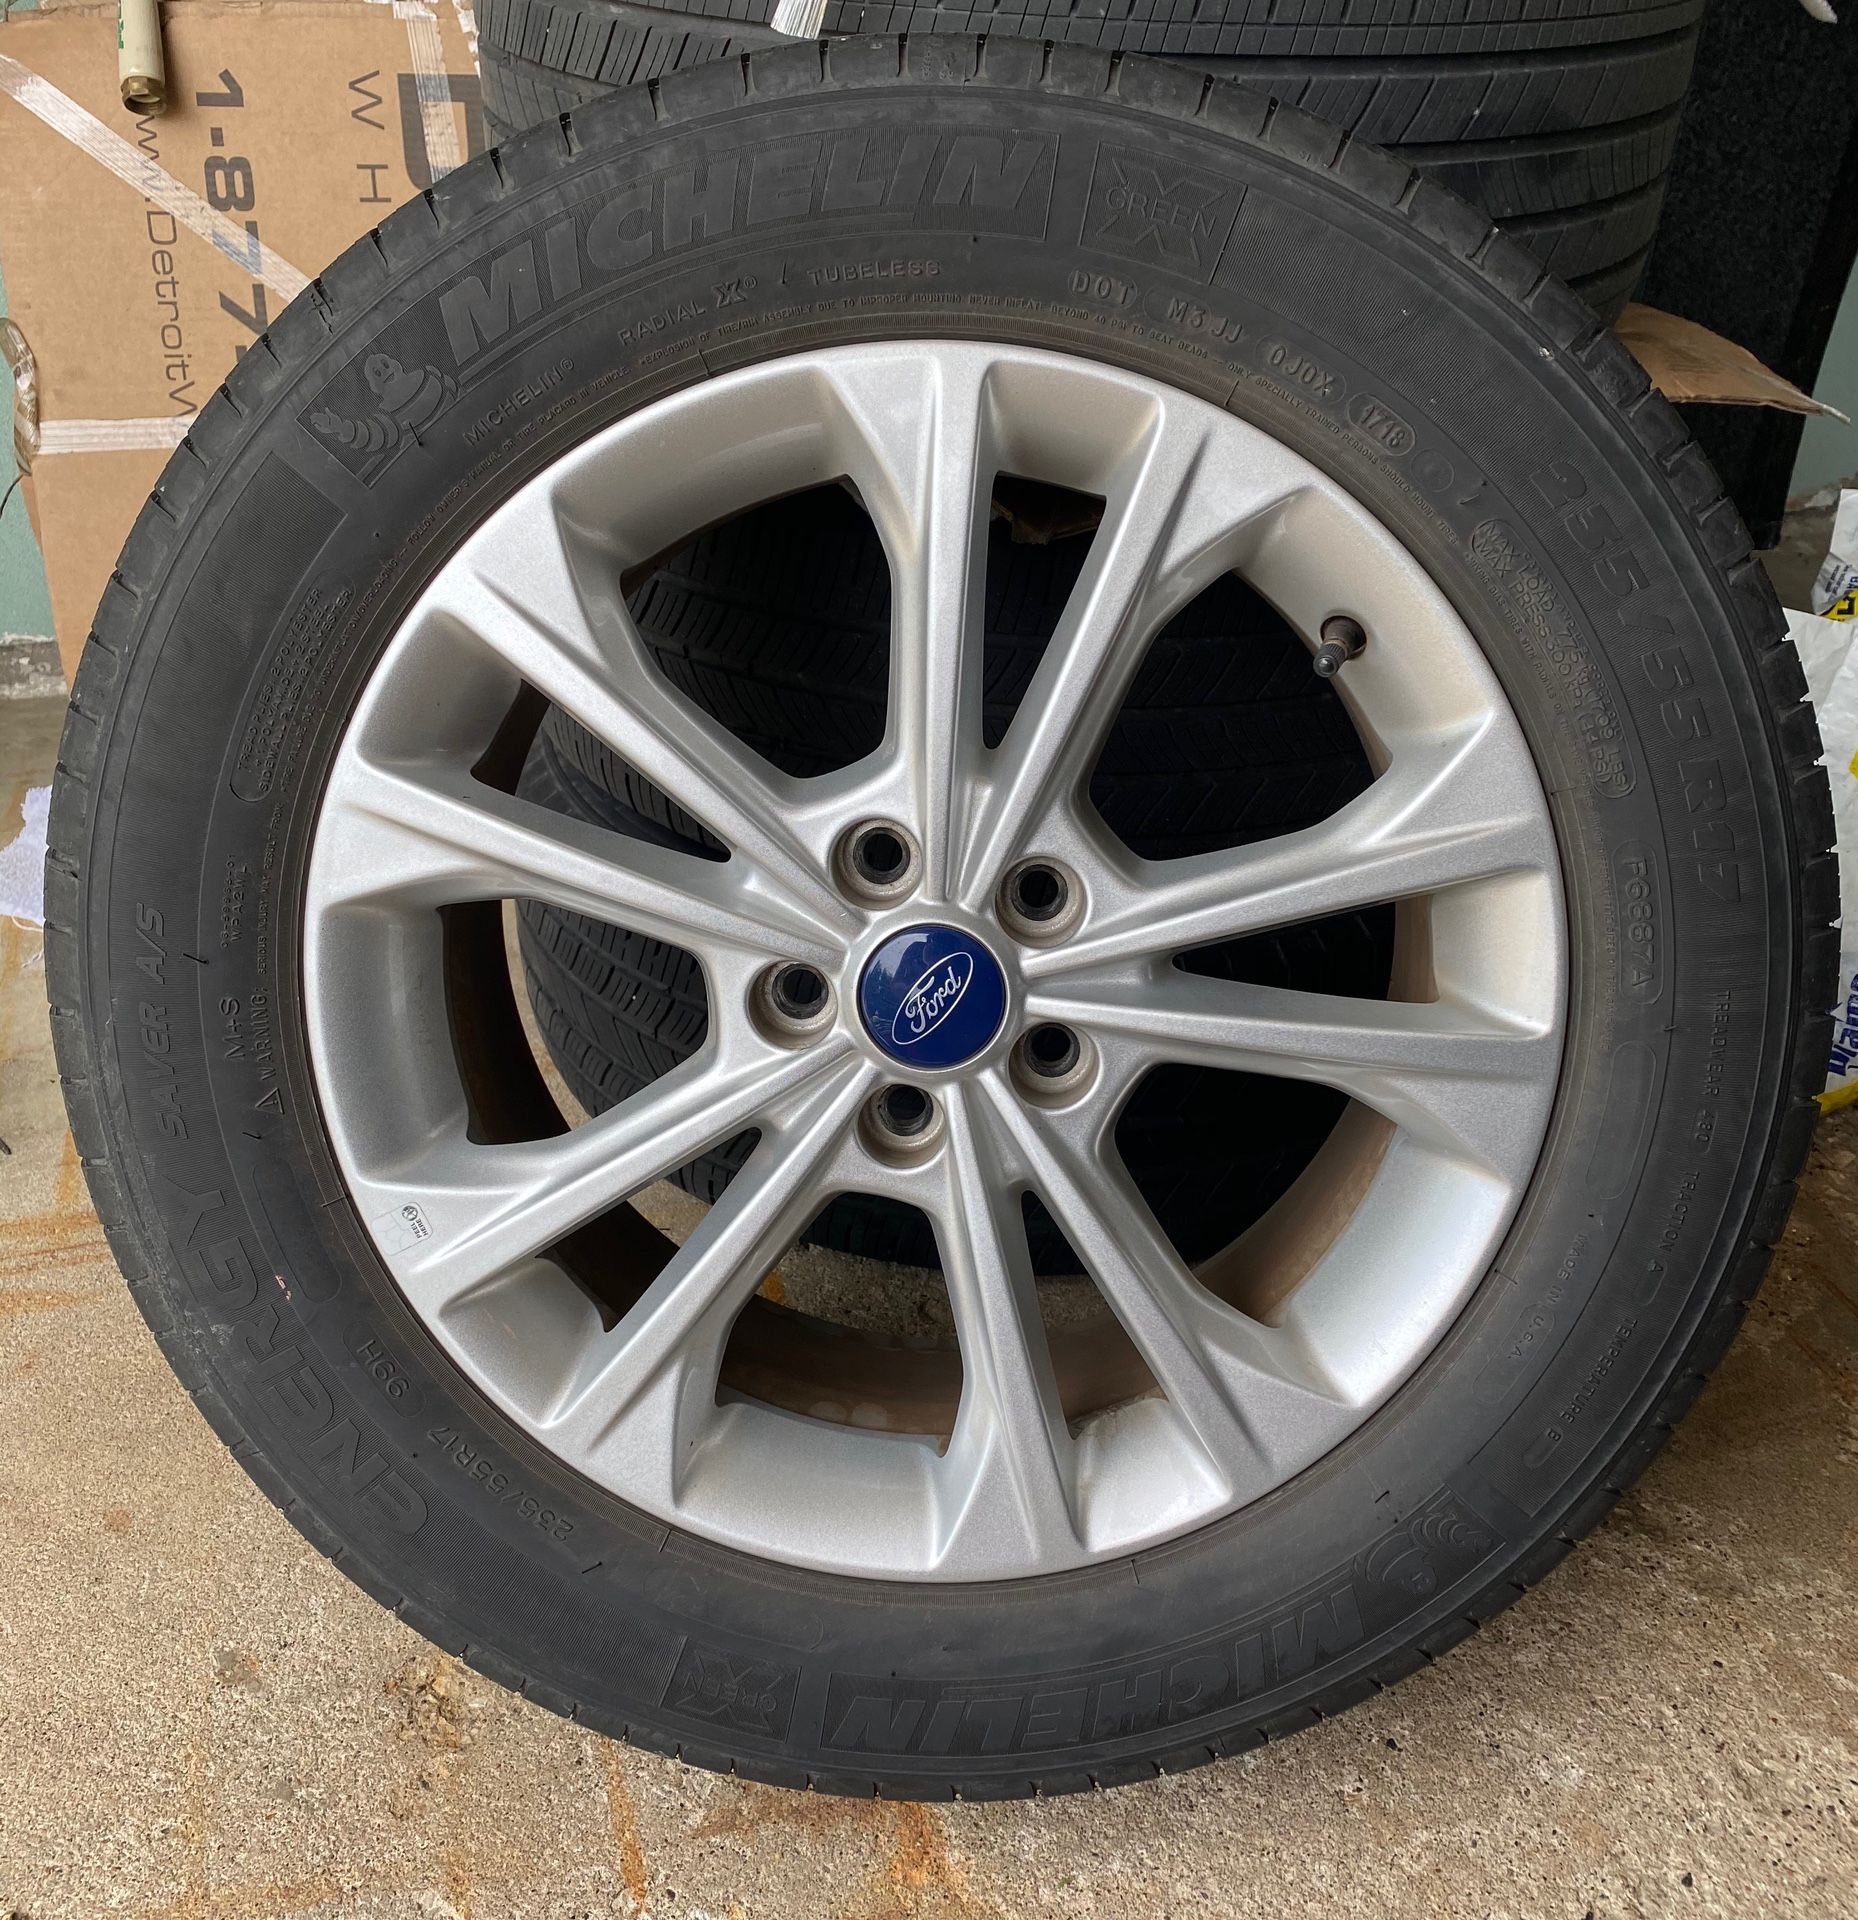 Ford 17" Rims and Michelin Tires (Sensors included)